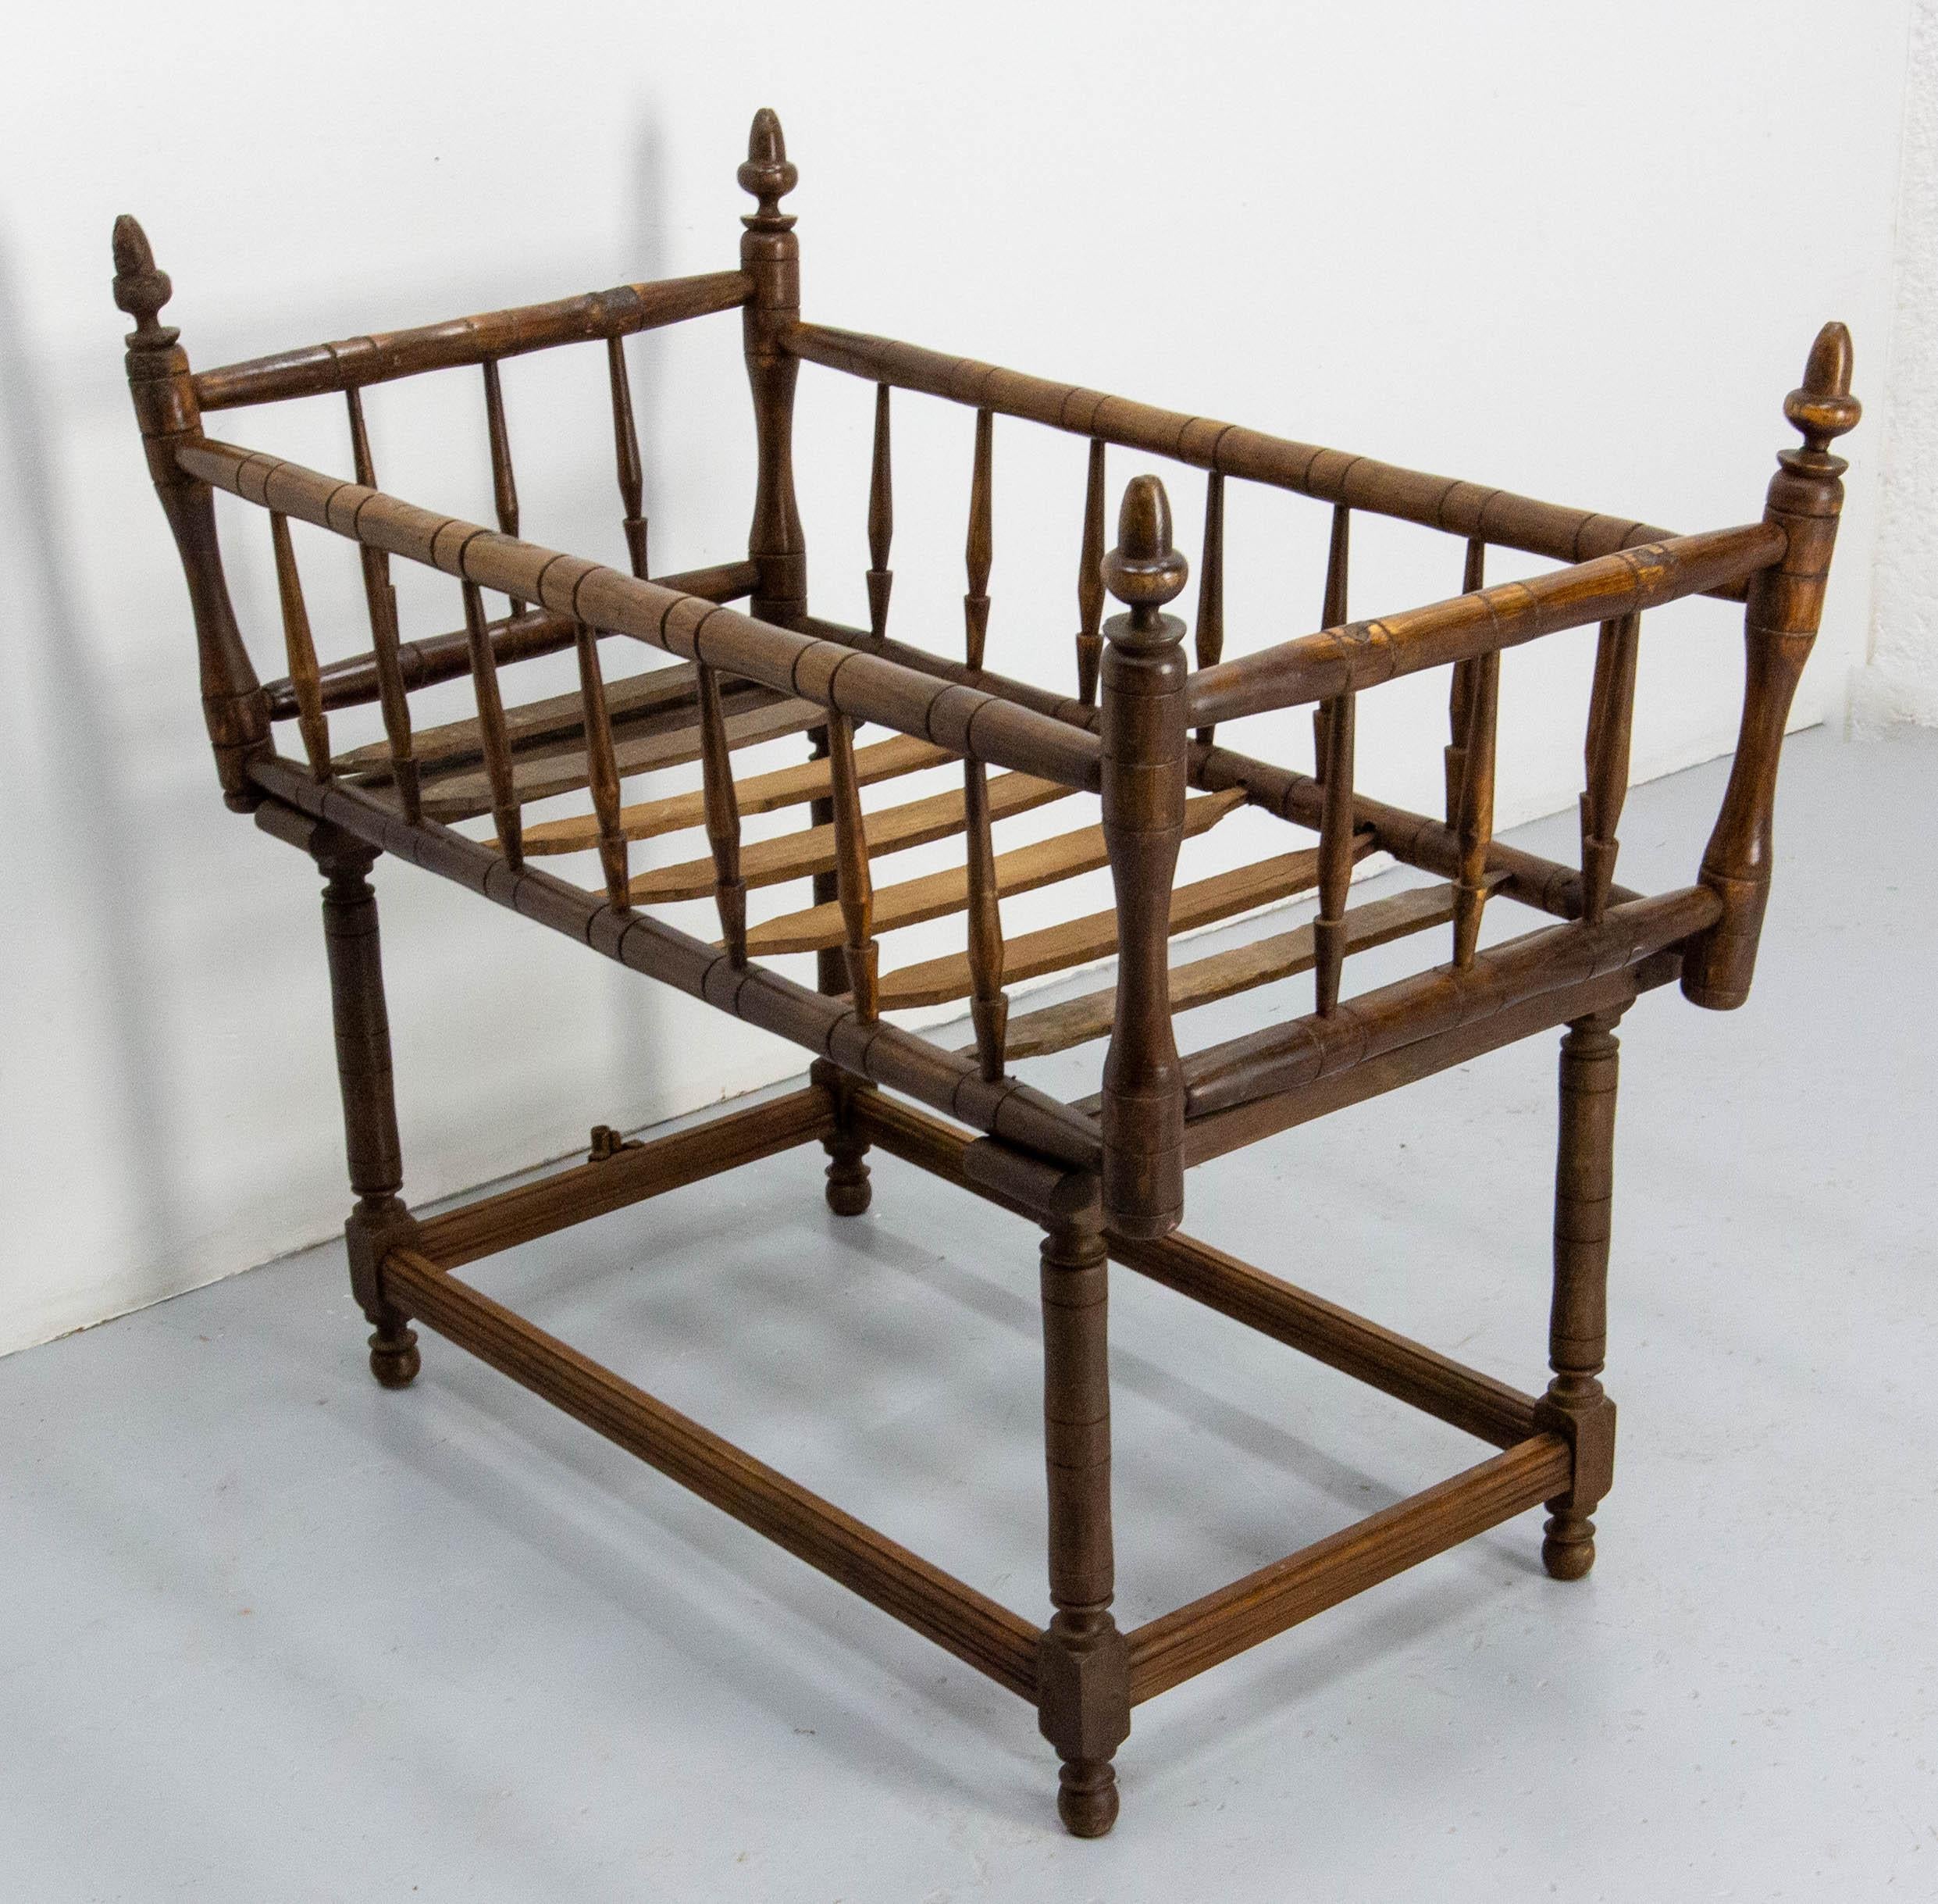 French Provincial 19th Century Toy Chest or Coffer Carved Chestnut Ancient Baby Cradle, French For Sale